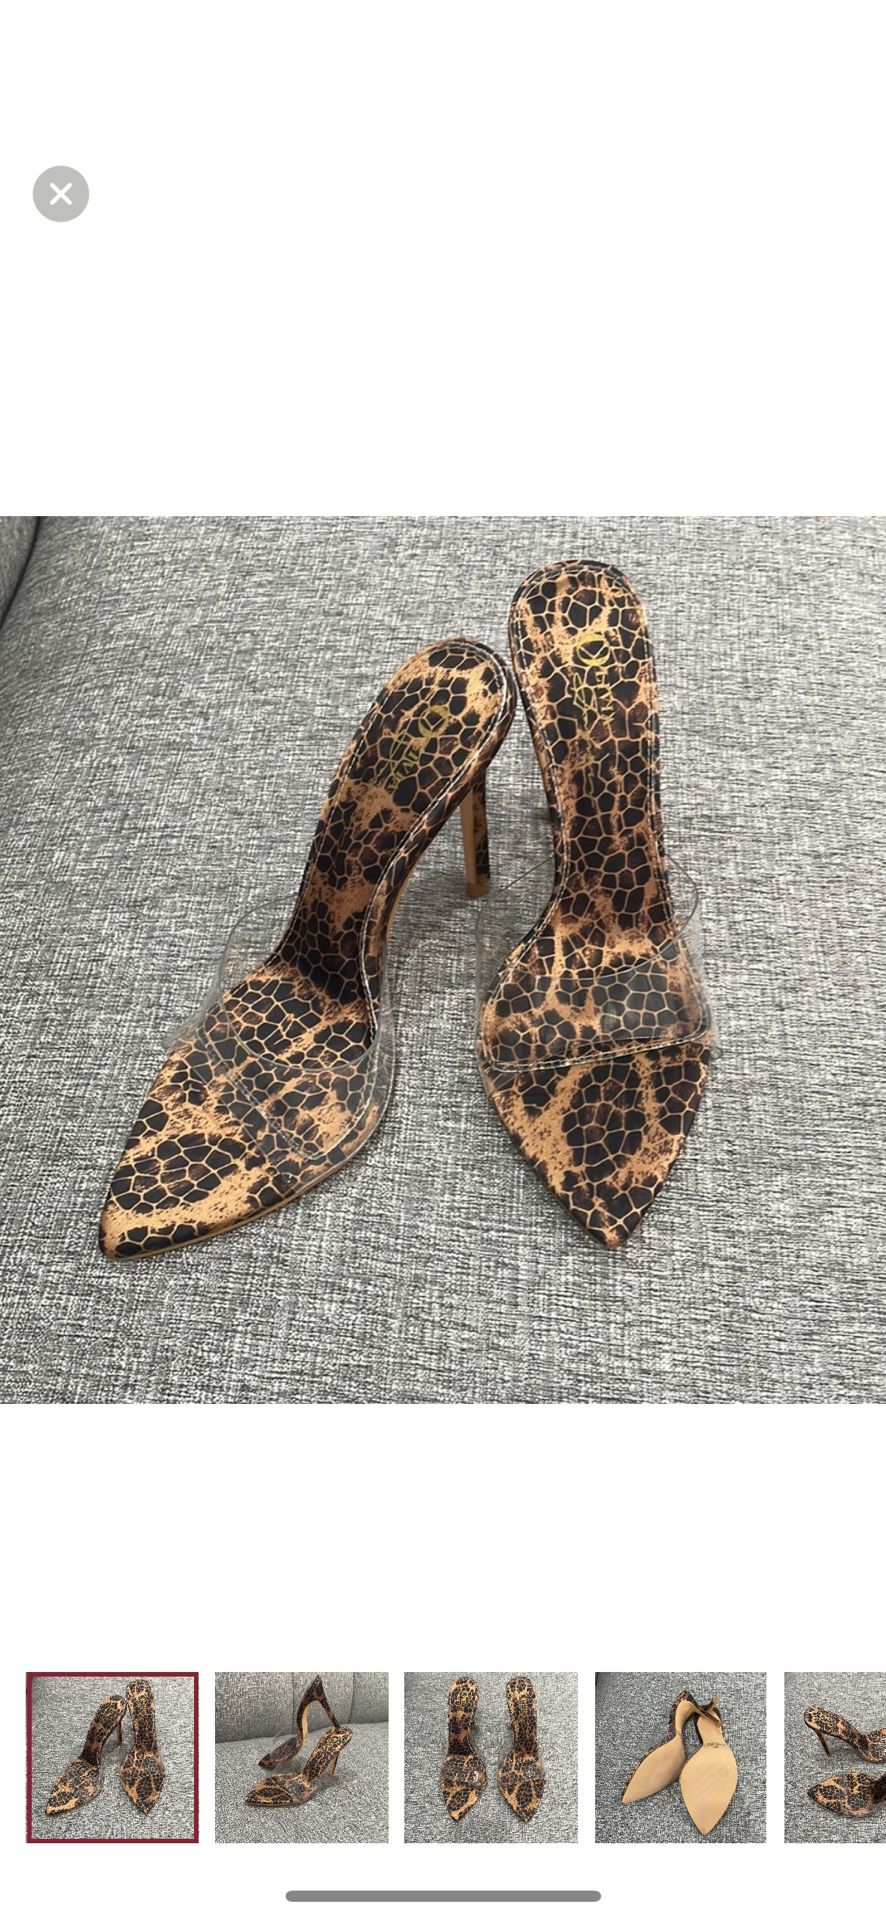 New Olivia Jaymes Women's Transparent Leopard Pattern Stiletto Heeled Mule Sandals   Size 8 - 8.5 - 9 available  